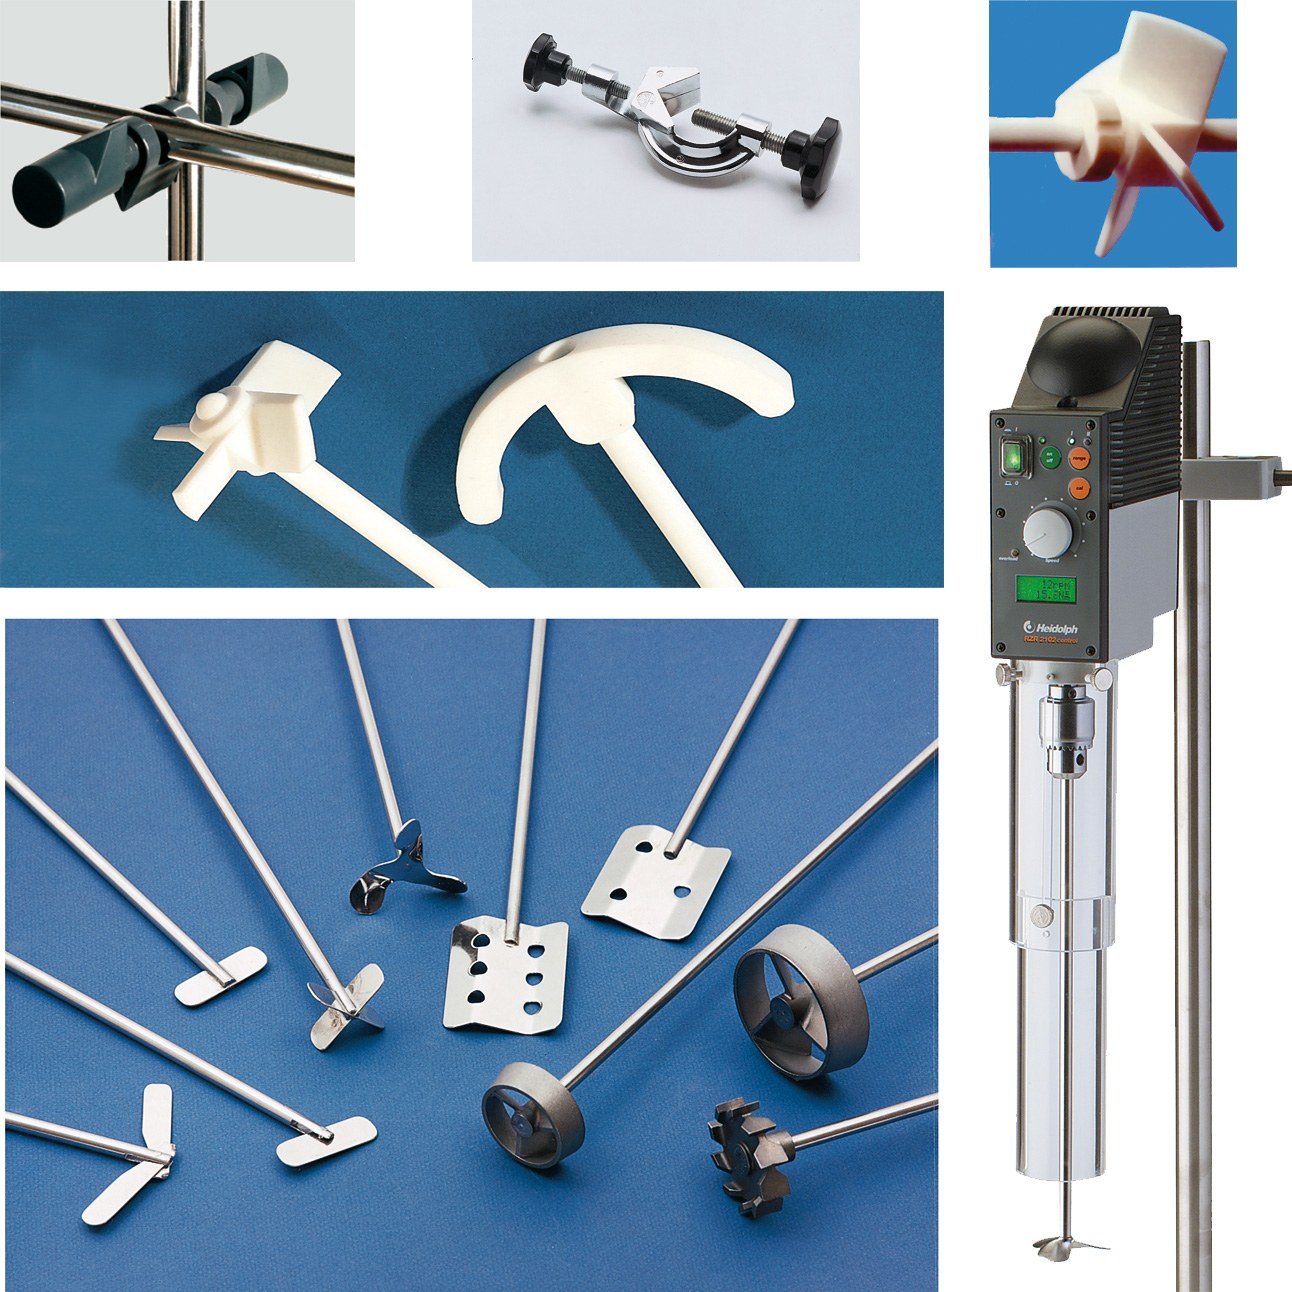 Accessories for Overhead Stirrers